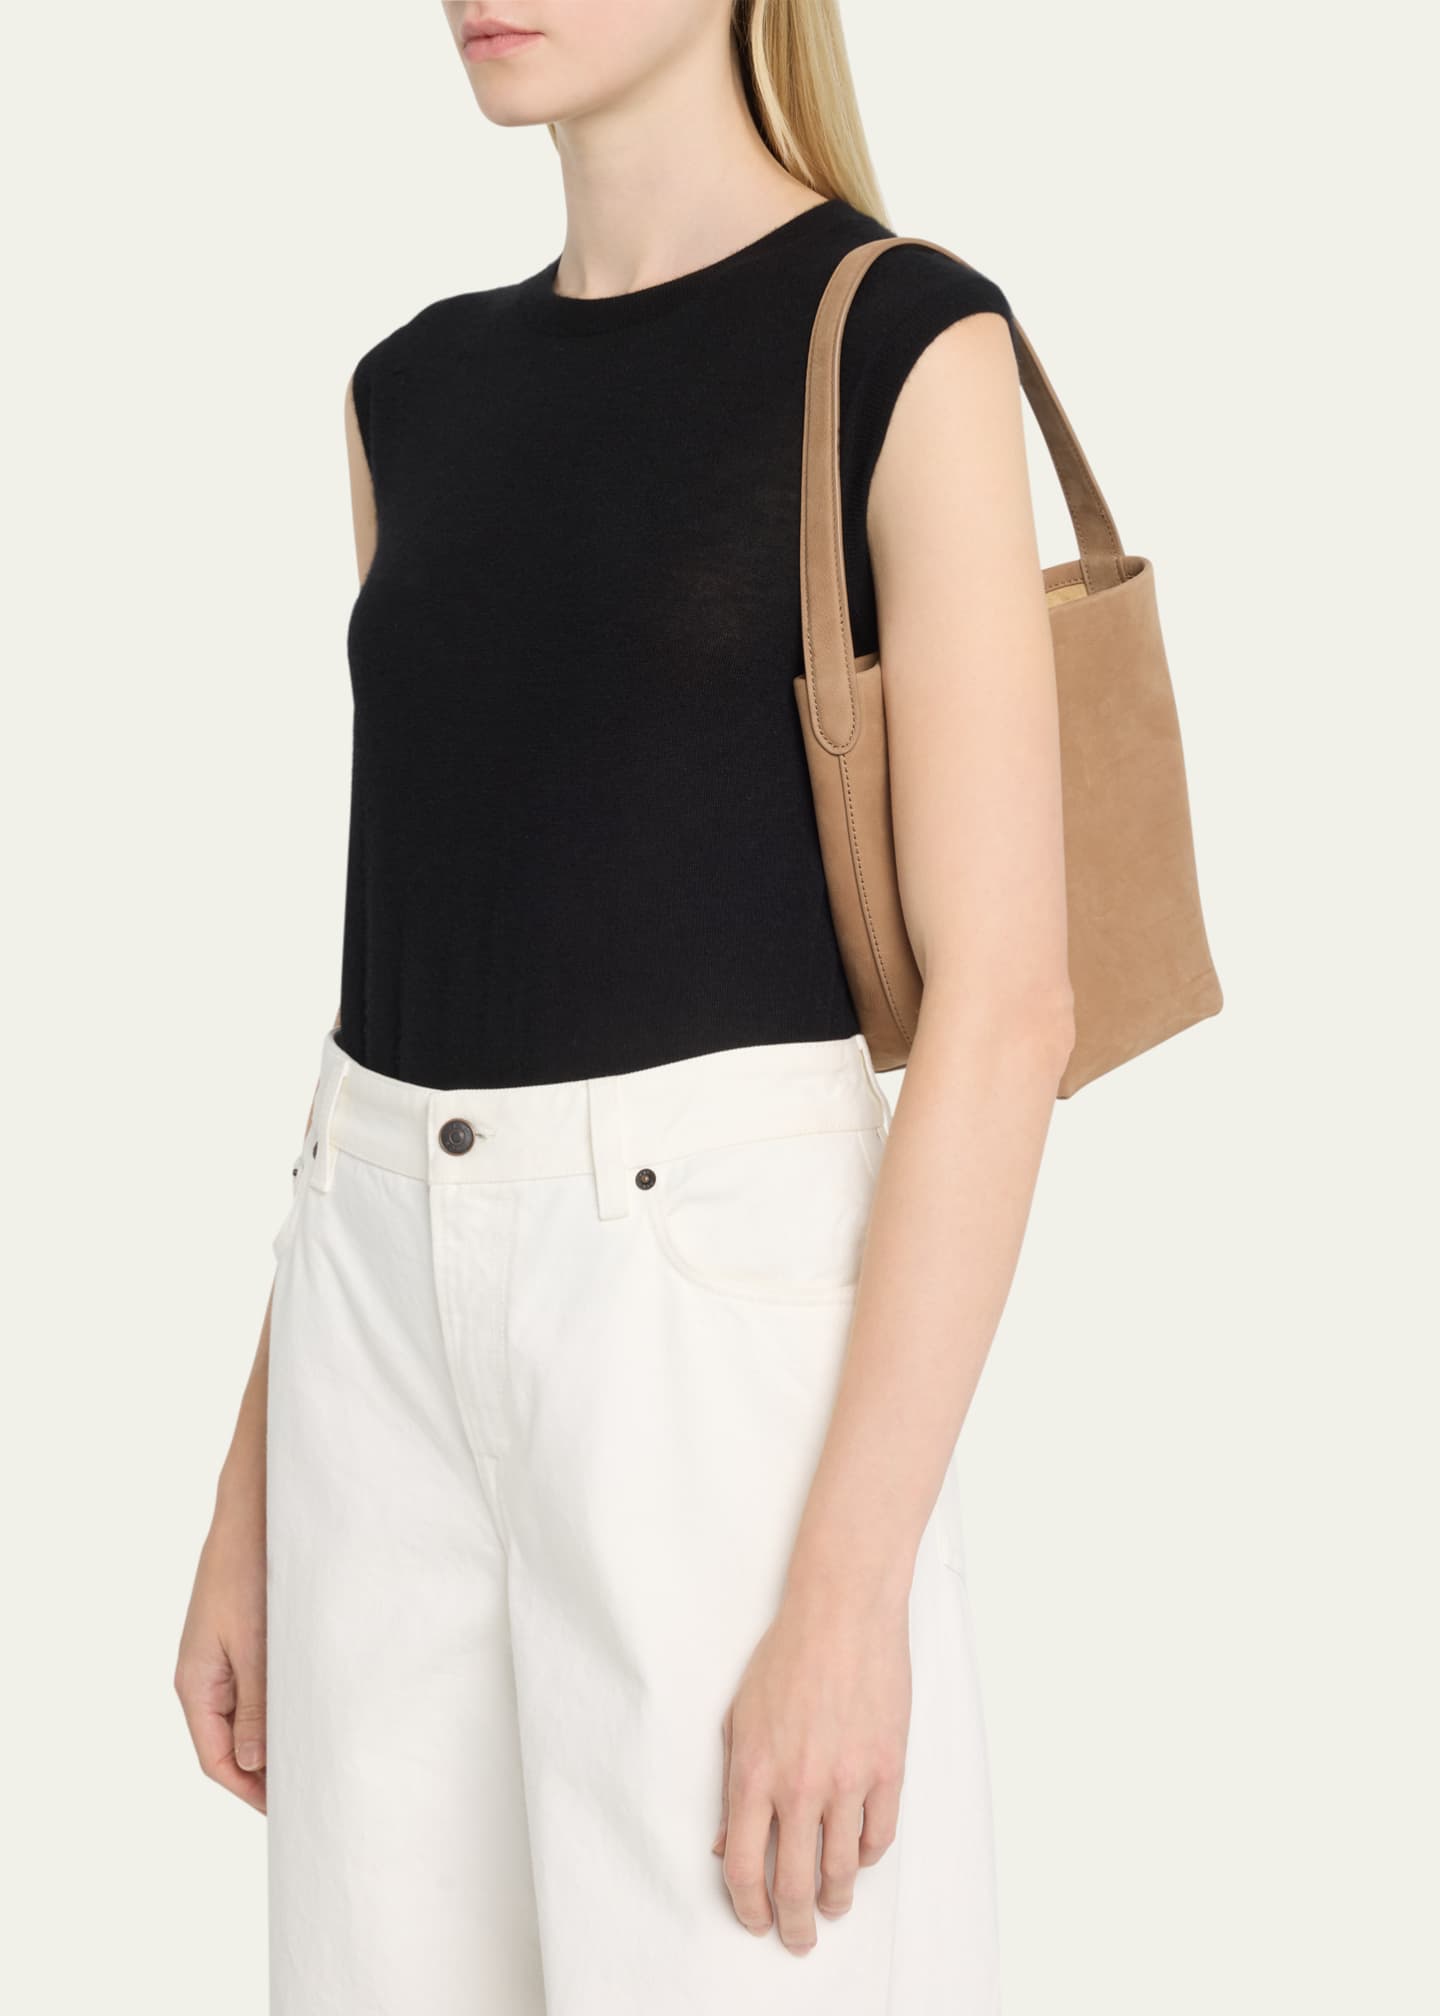 The Row Small Suede Park Tote Bag